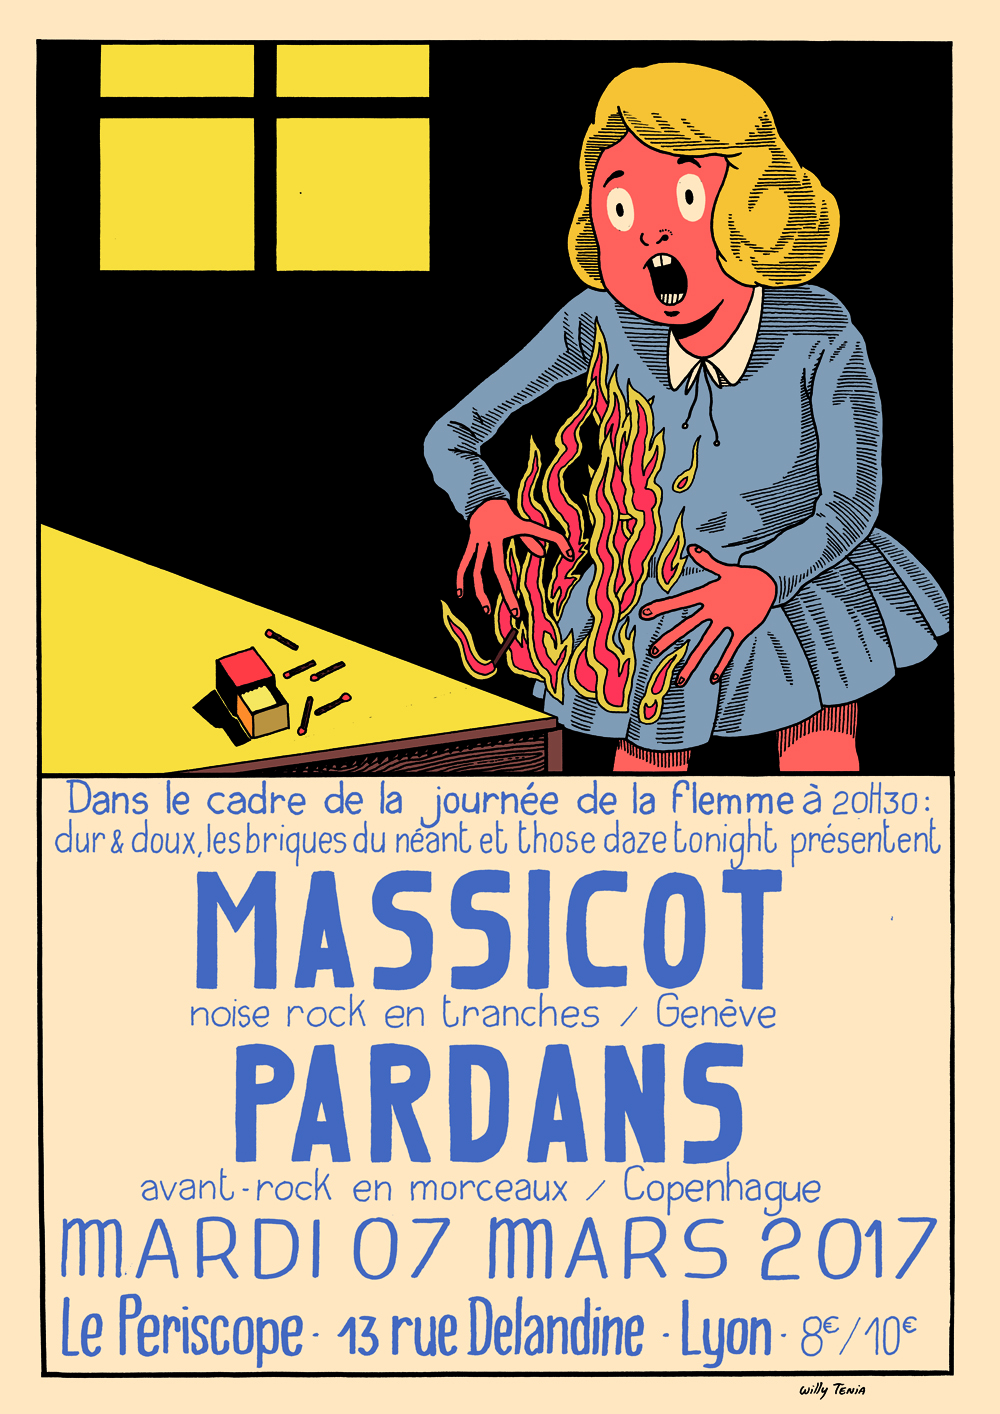 Massicot + Pardans poster © Willy ténia